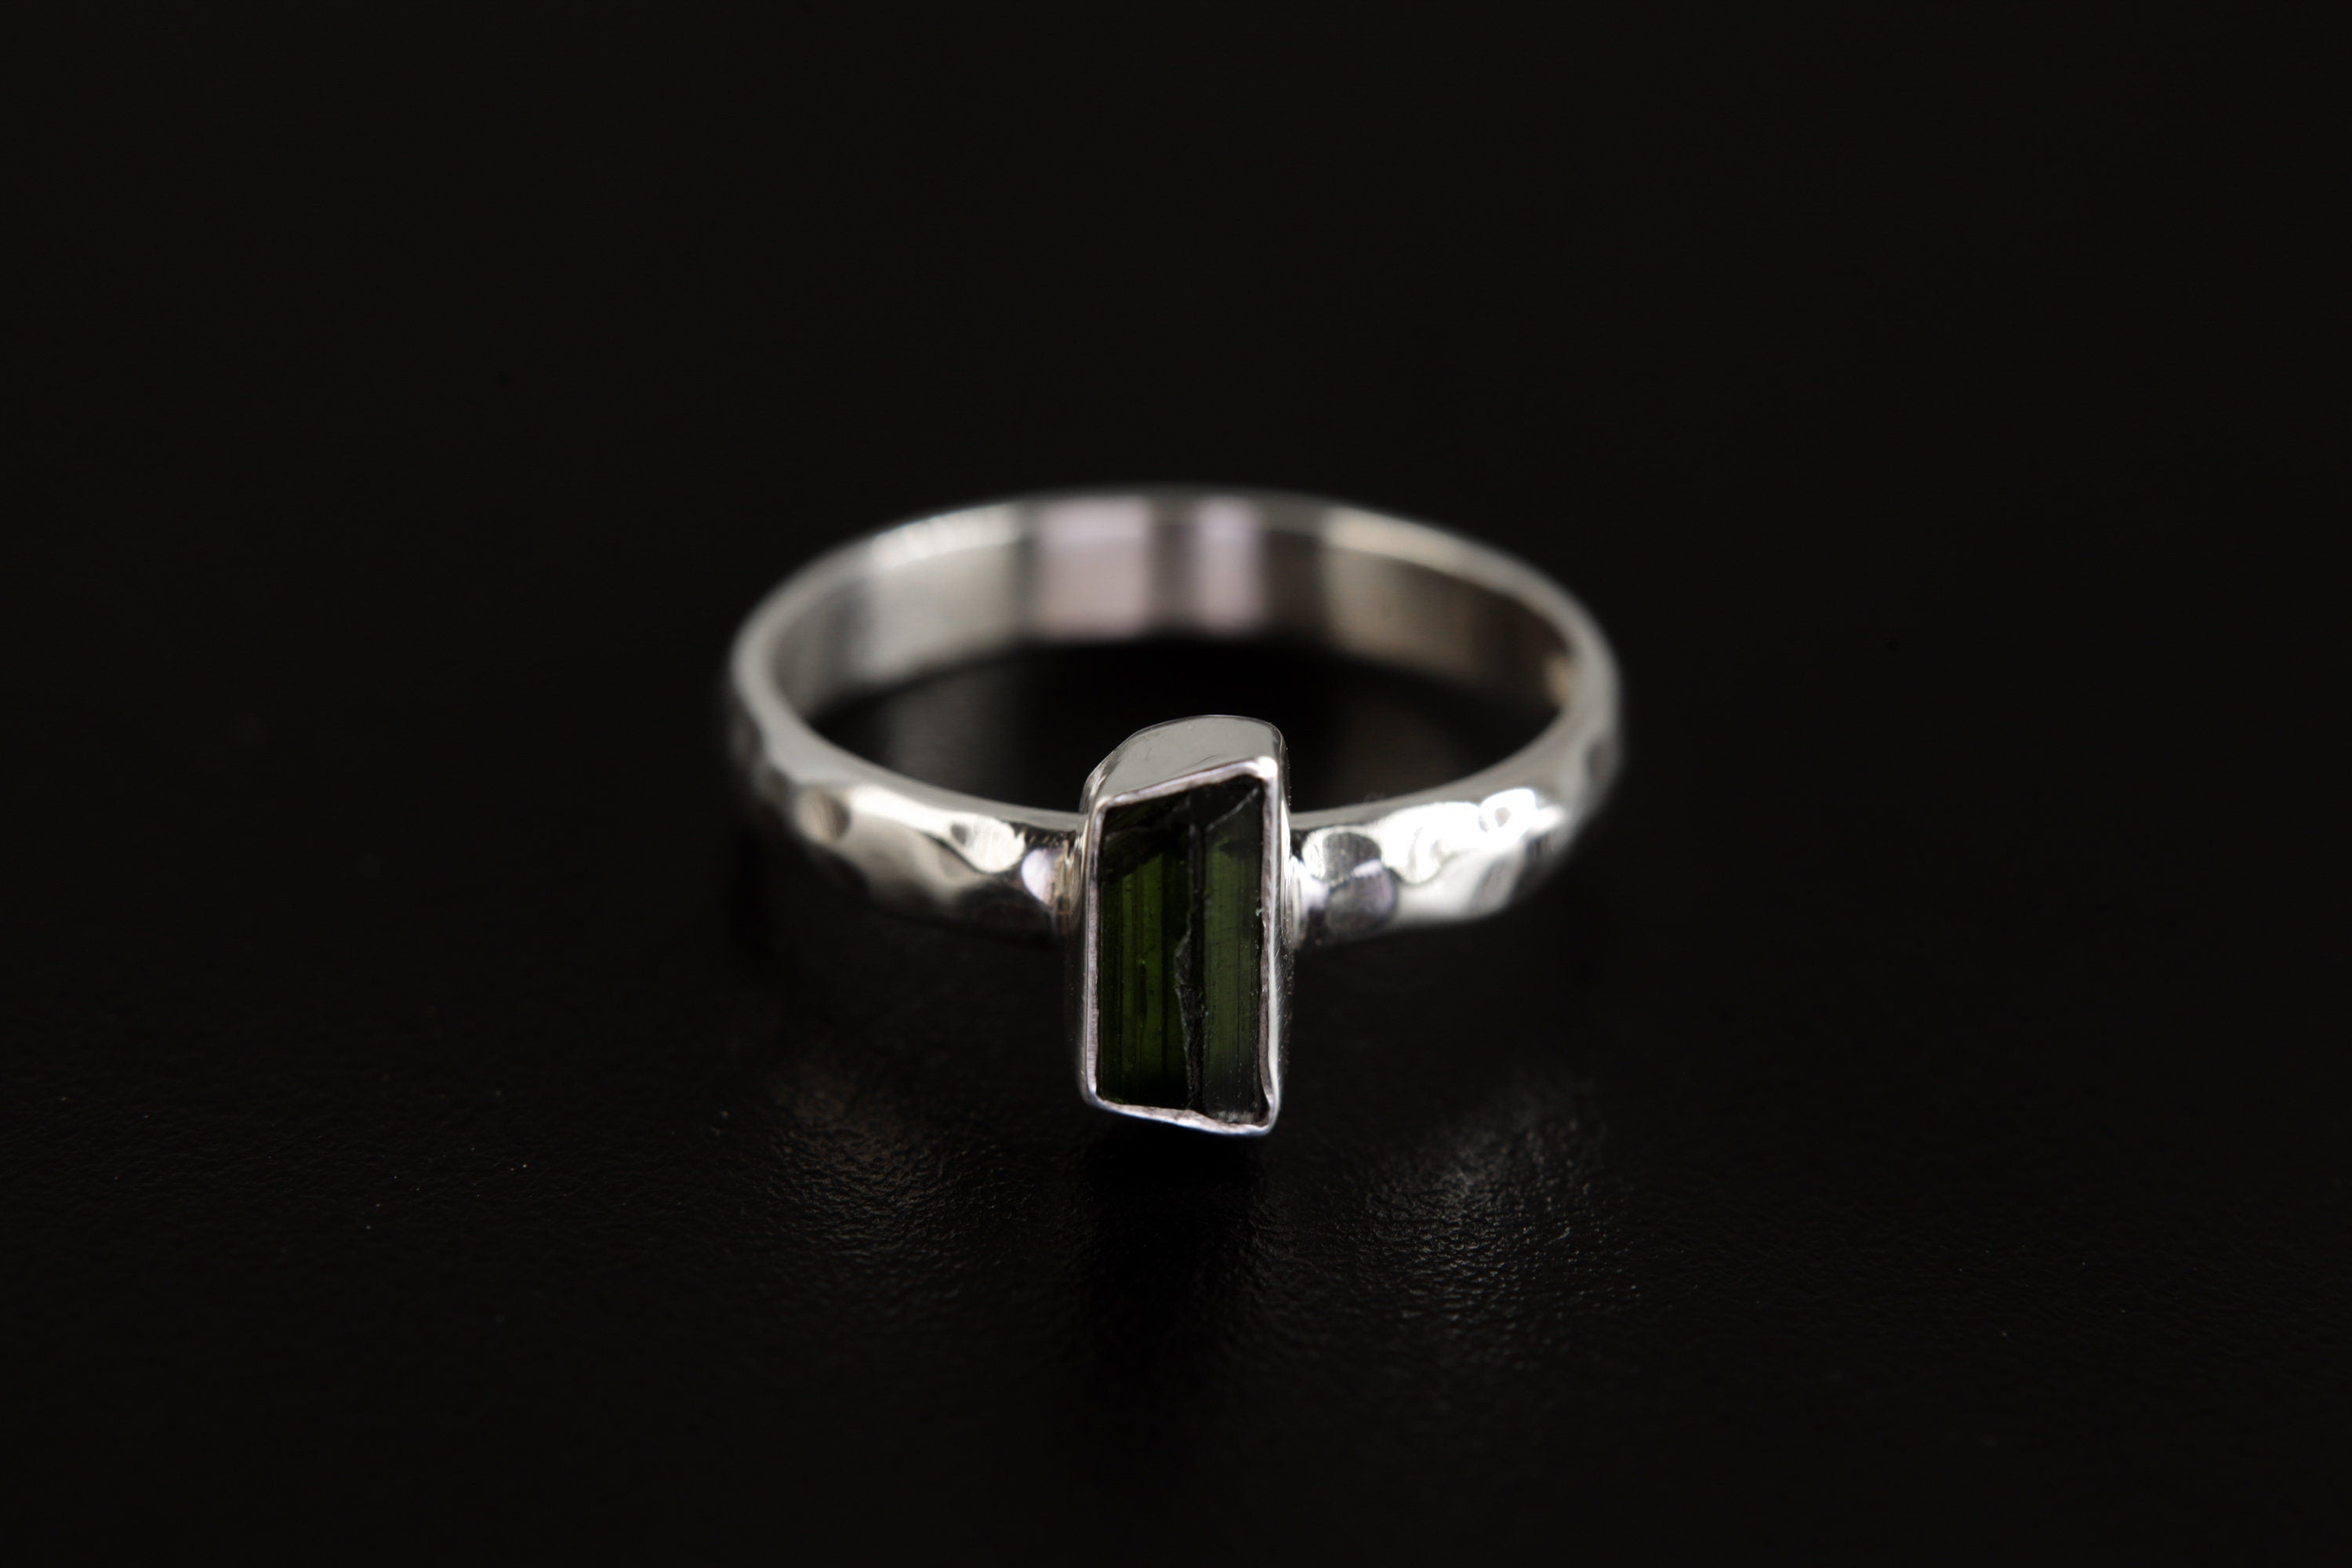 Verdant Touch : Green Tourmaline - Sterling Silver Ring - Hammer Textured & Shiny Finish - Size 6 US - NO/02